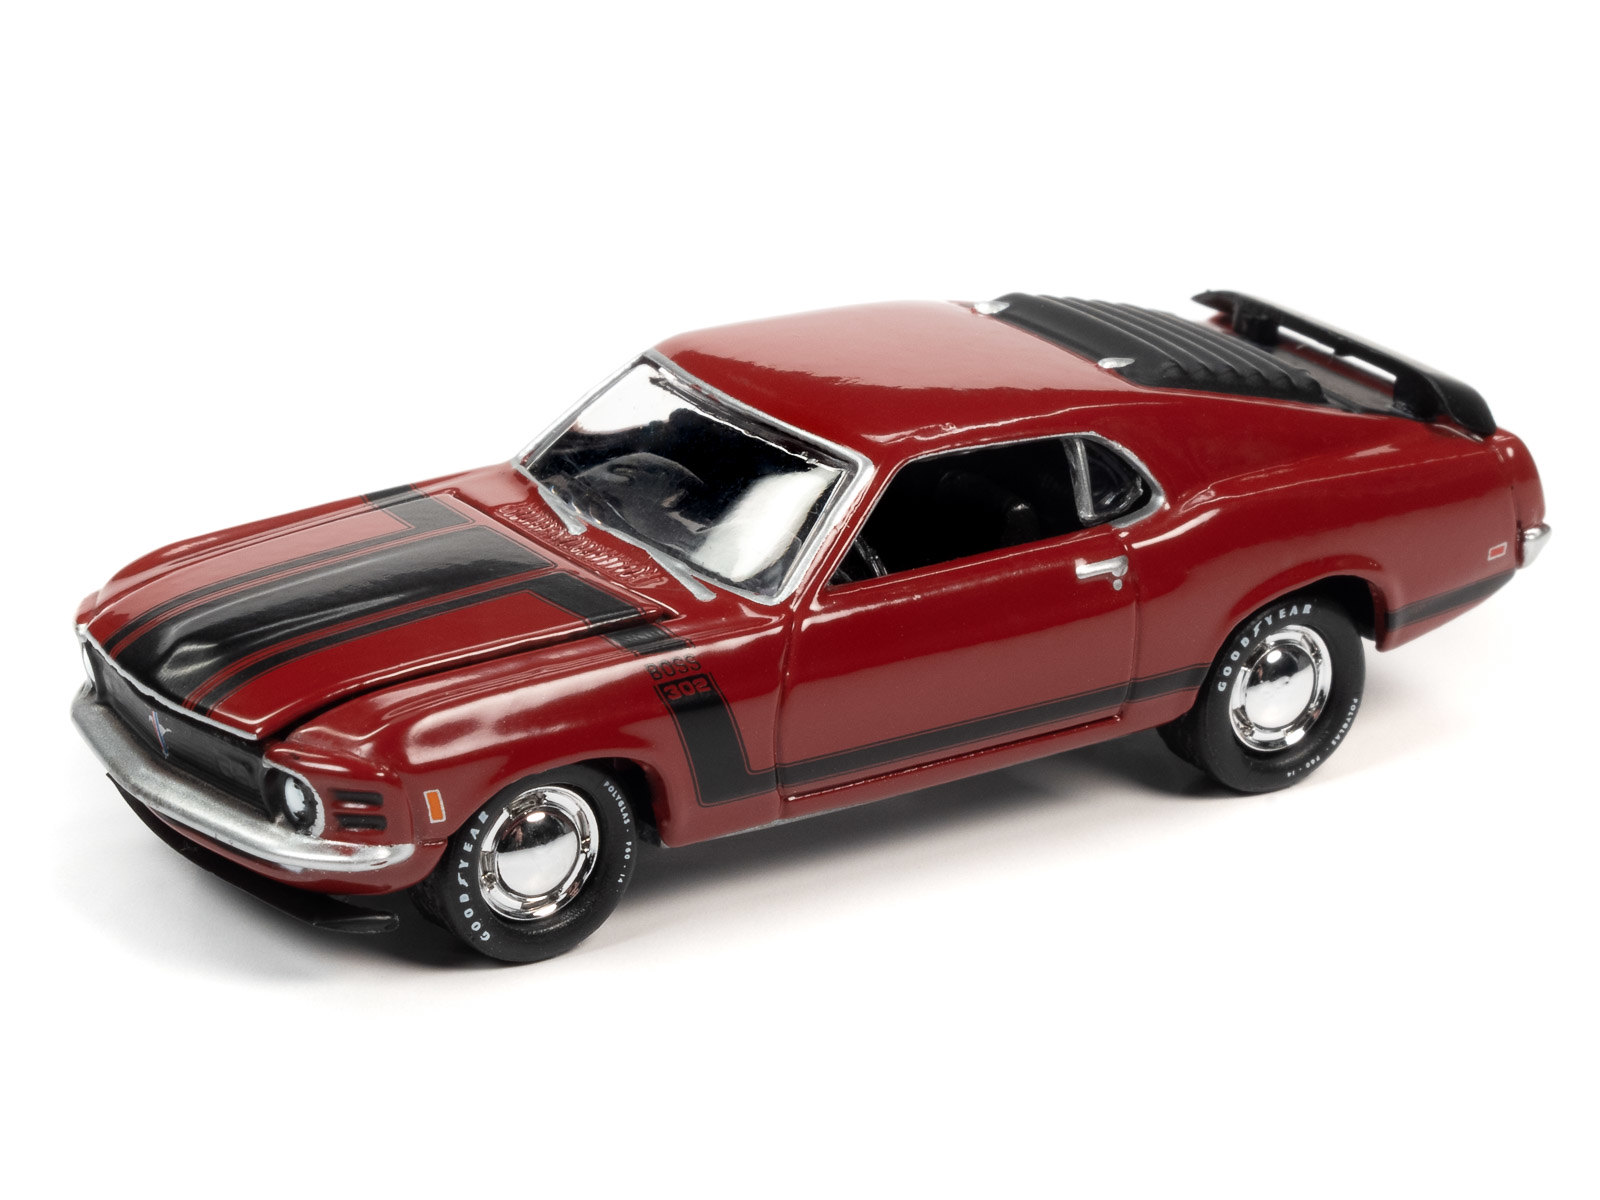 1970 FORD MUSTANG BOSS 302 CANDY APPLE RED